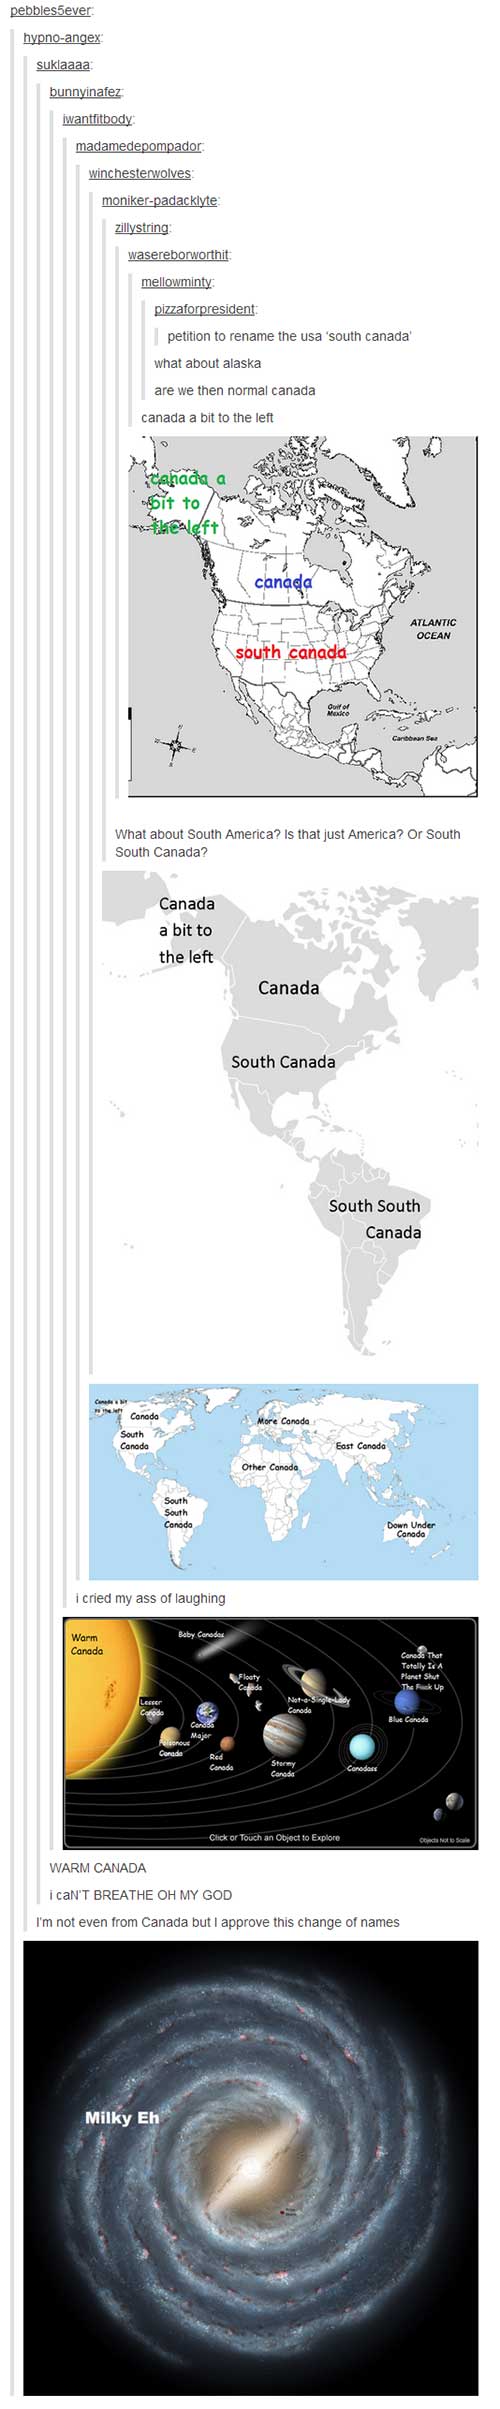 tumblr - canada meme - pebbles5ever hypnoangex suklaaaa bunnyinafez wantfitbody madamedepompador winchesterwolves monikerpadacklyte zillystring wasereborworthit mellowminty pizzaforpresident petition to rename the usa 'south canada what about alaska are w